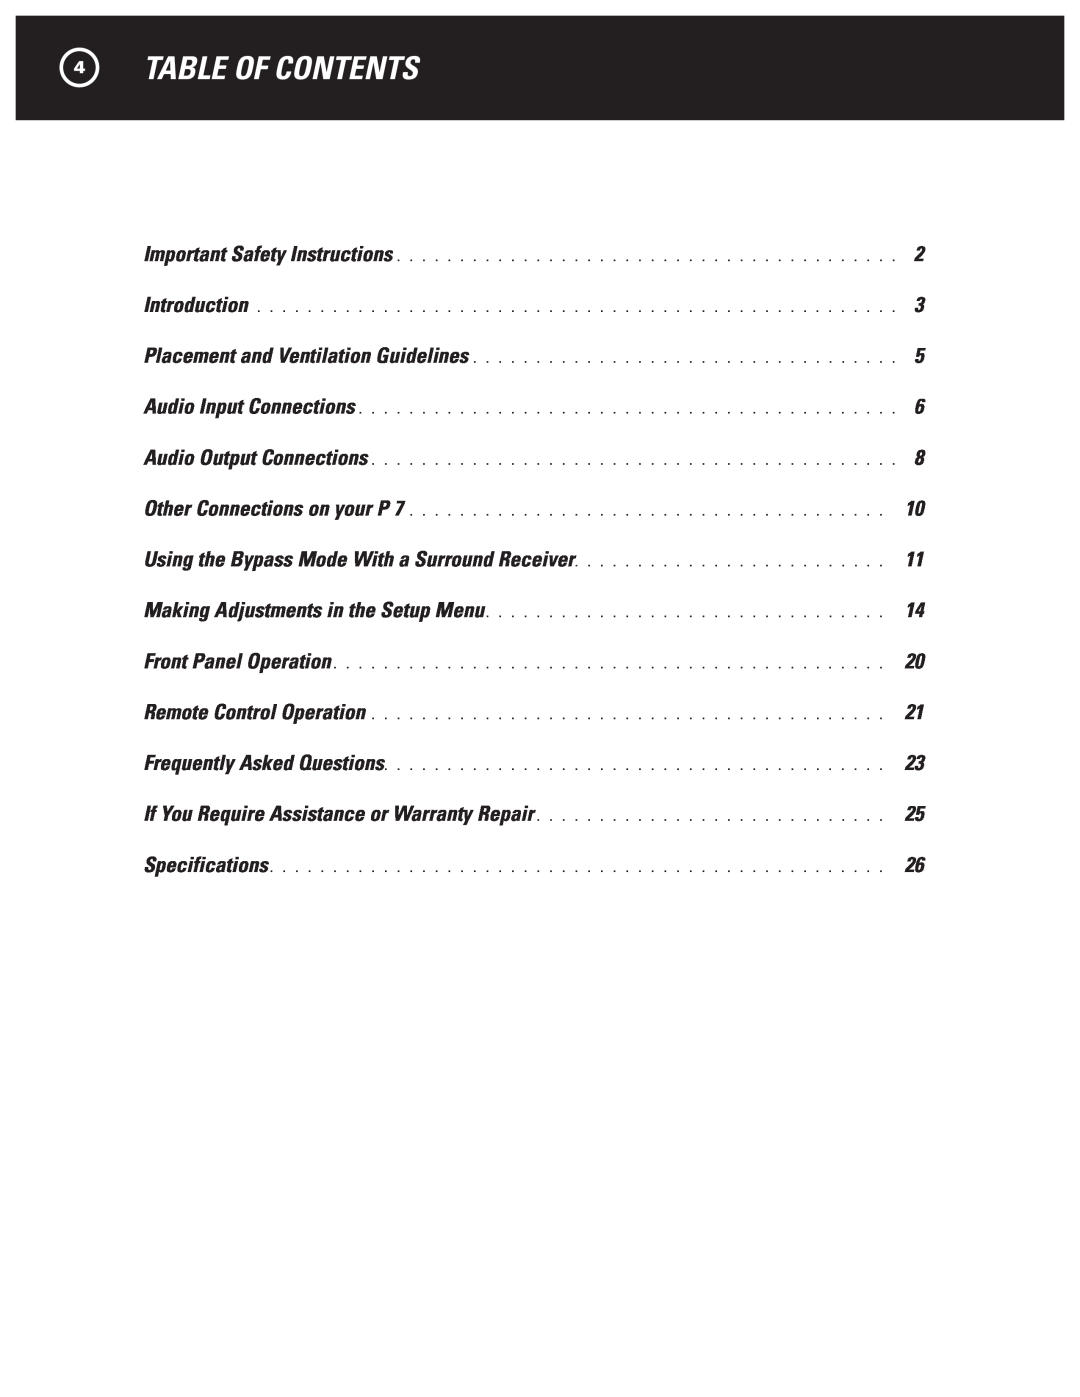 Parasound P 7 manual 4TABLE OF CONTENTS 